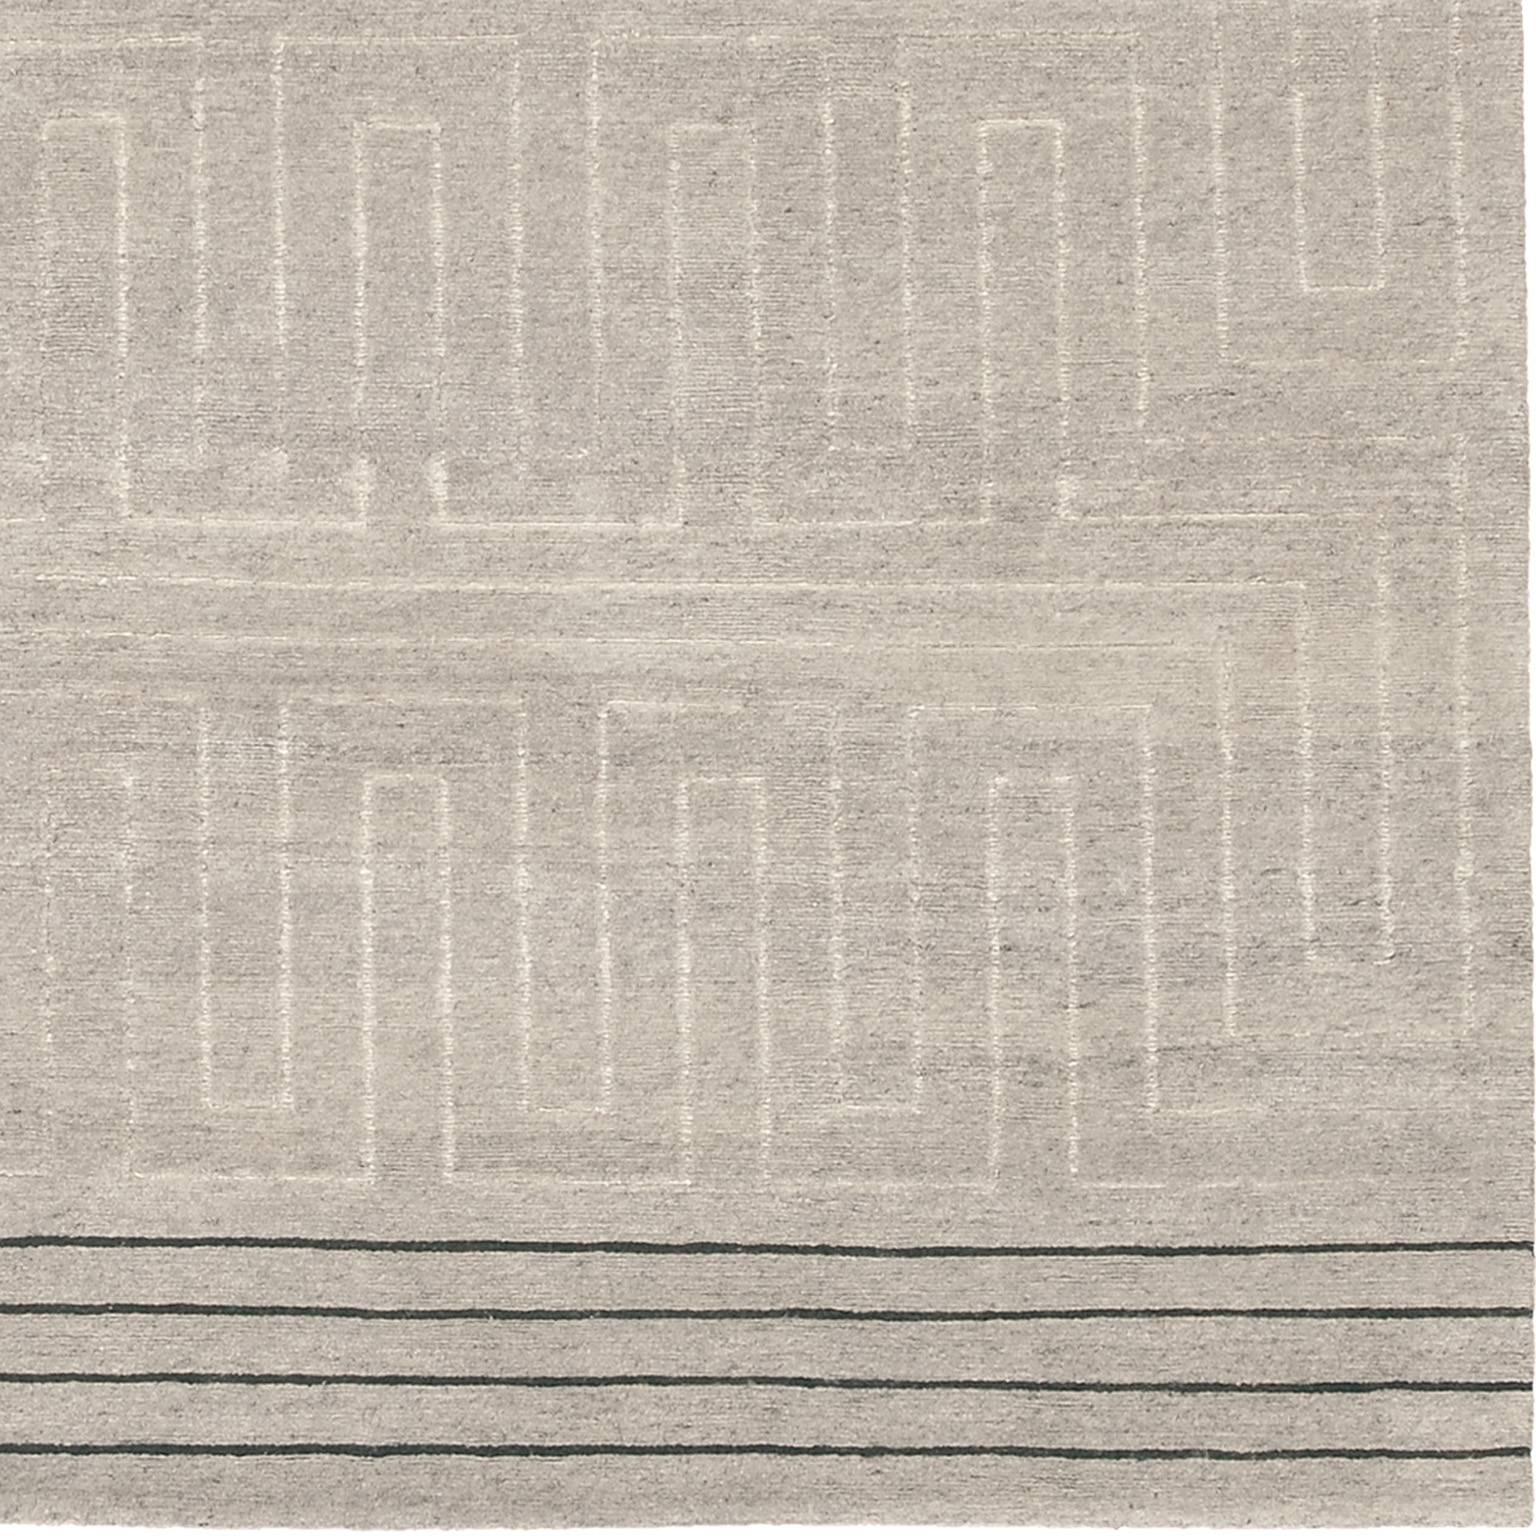 Contemporary 'Marion II' Grey Tibetan Wool and Silk Carpet
This Tibetan wool and silk rug was inspired by the modern aesthetic of the 20th century.
Enhancing its flossy textural feel, the field is un-dyed Tibetan and Ash wool, and its centre design